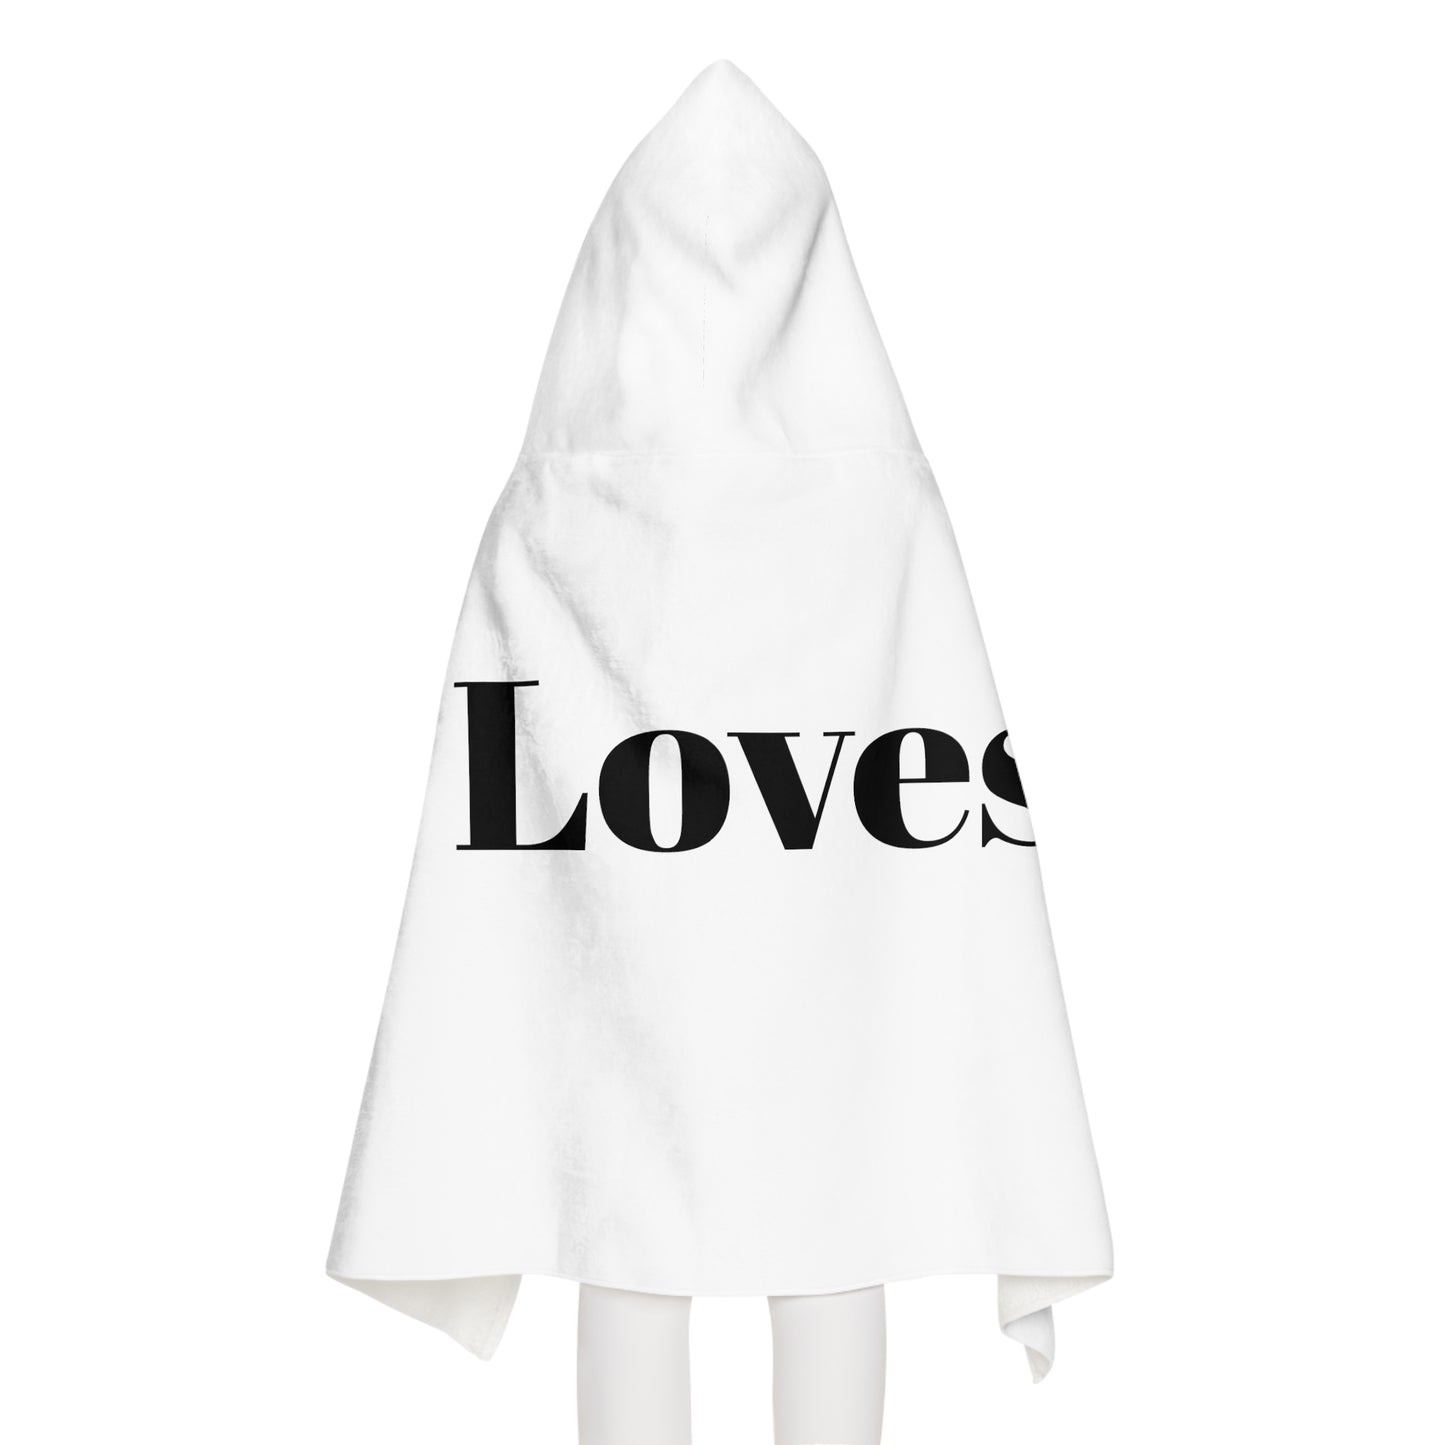 God Loves Me Youth Hooded Towel